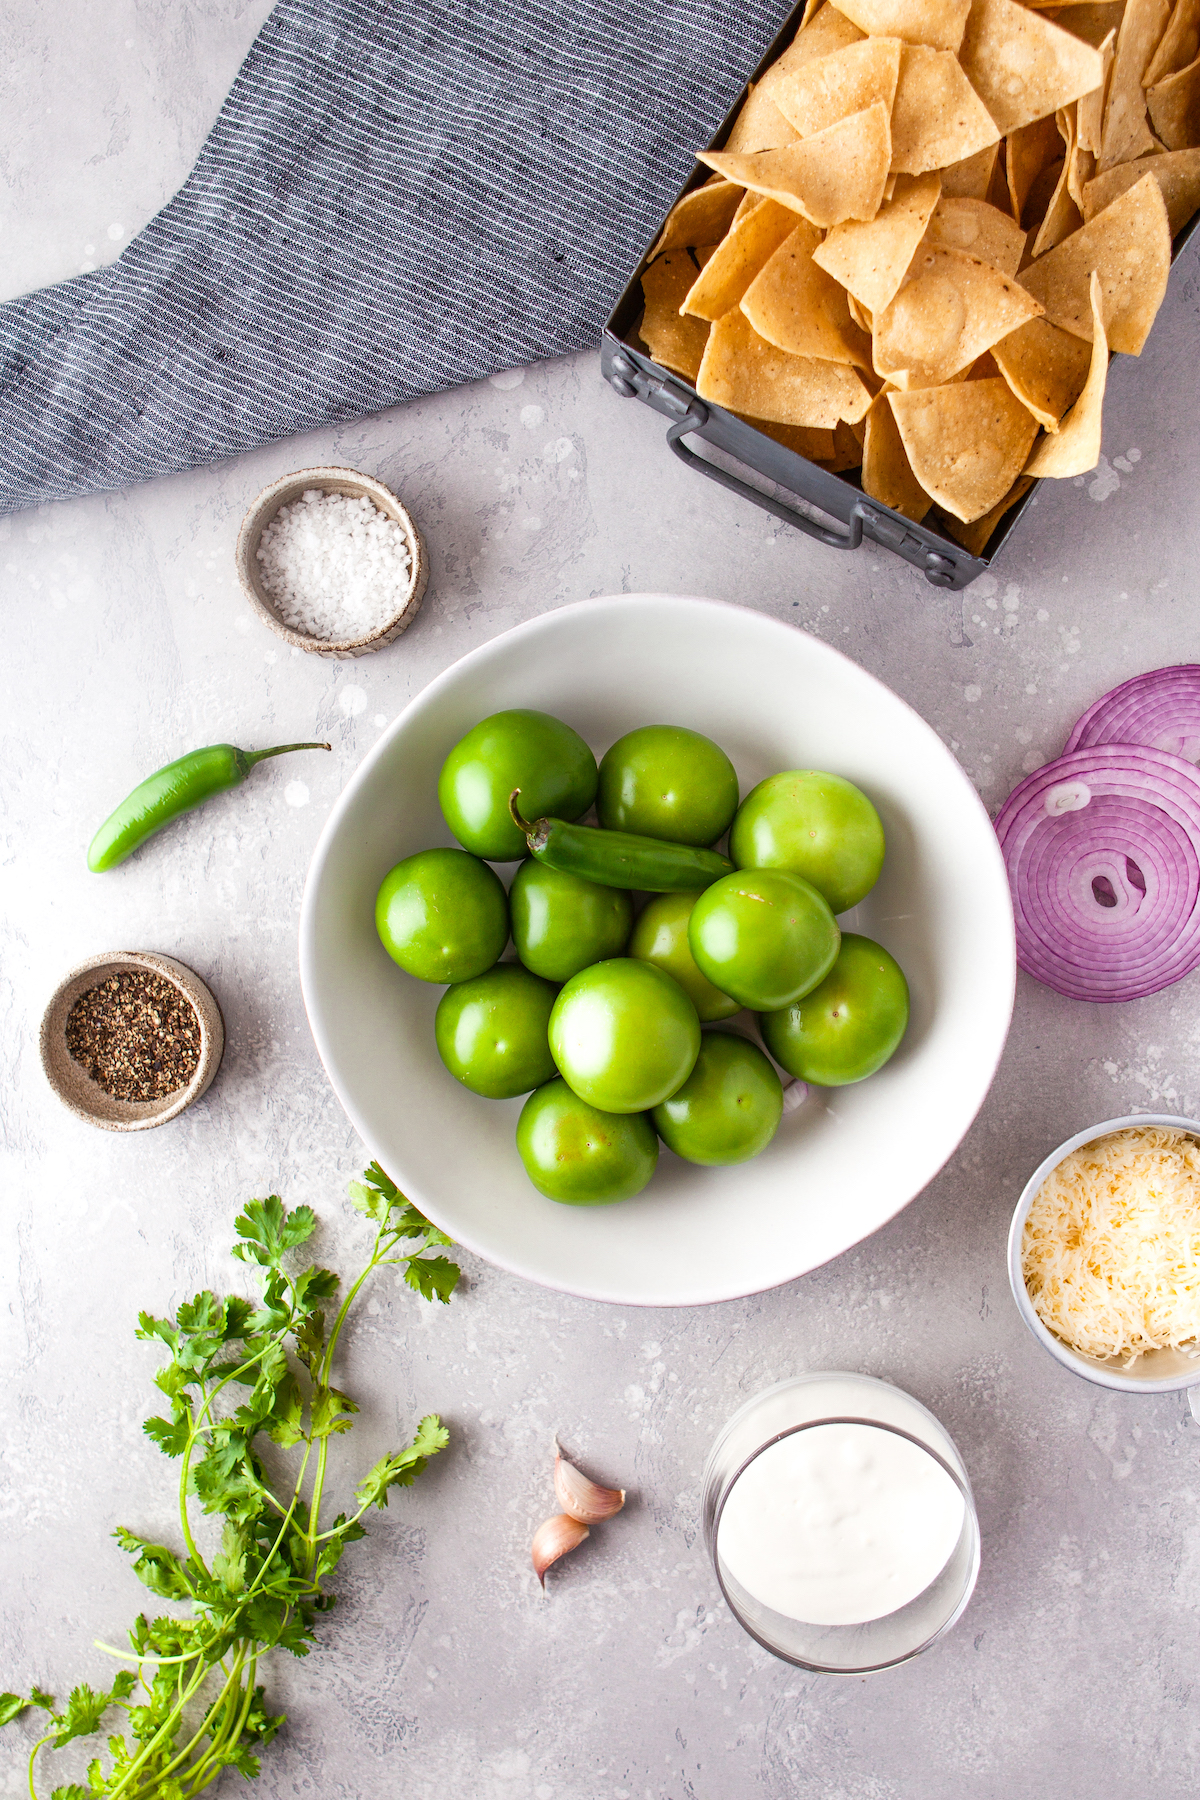 tomatillos in a bowl with other salsa verde ingredients like salt, red onions, pepper, and cilantro on the counter next to it